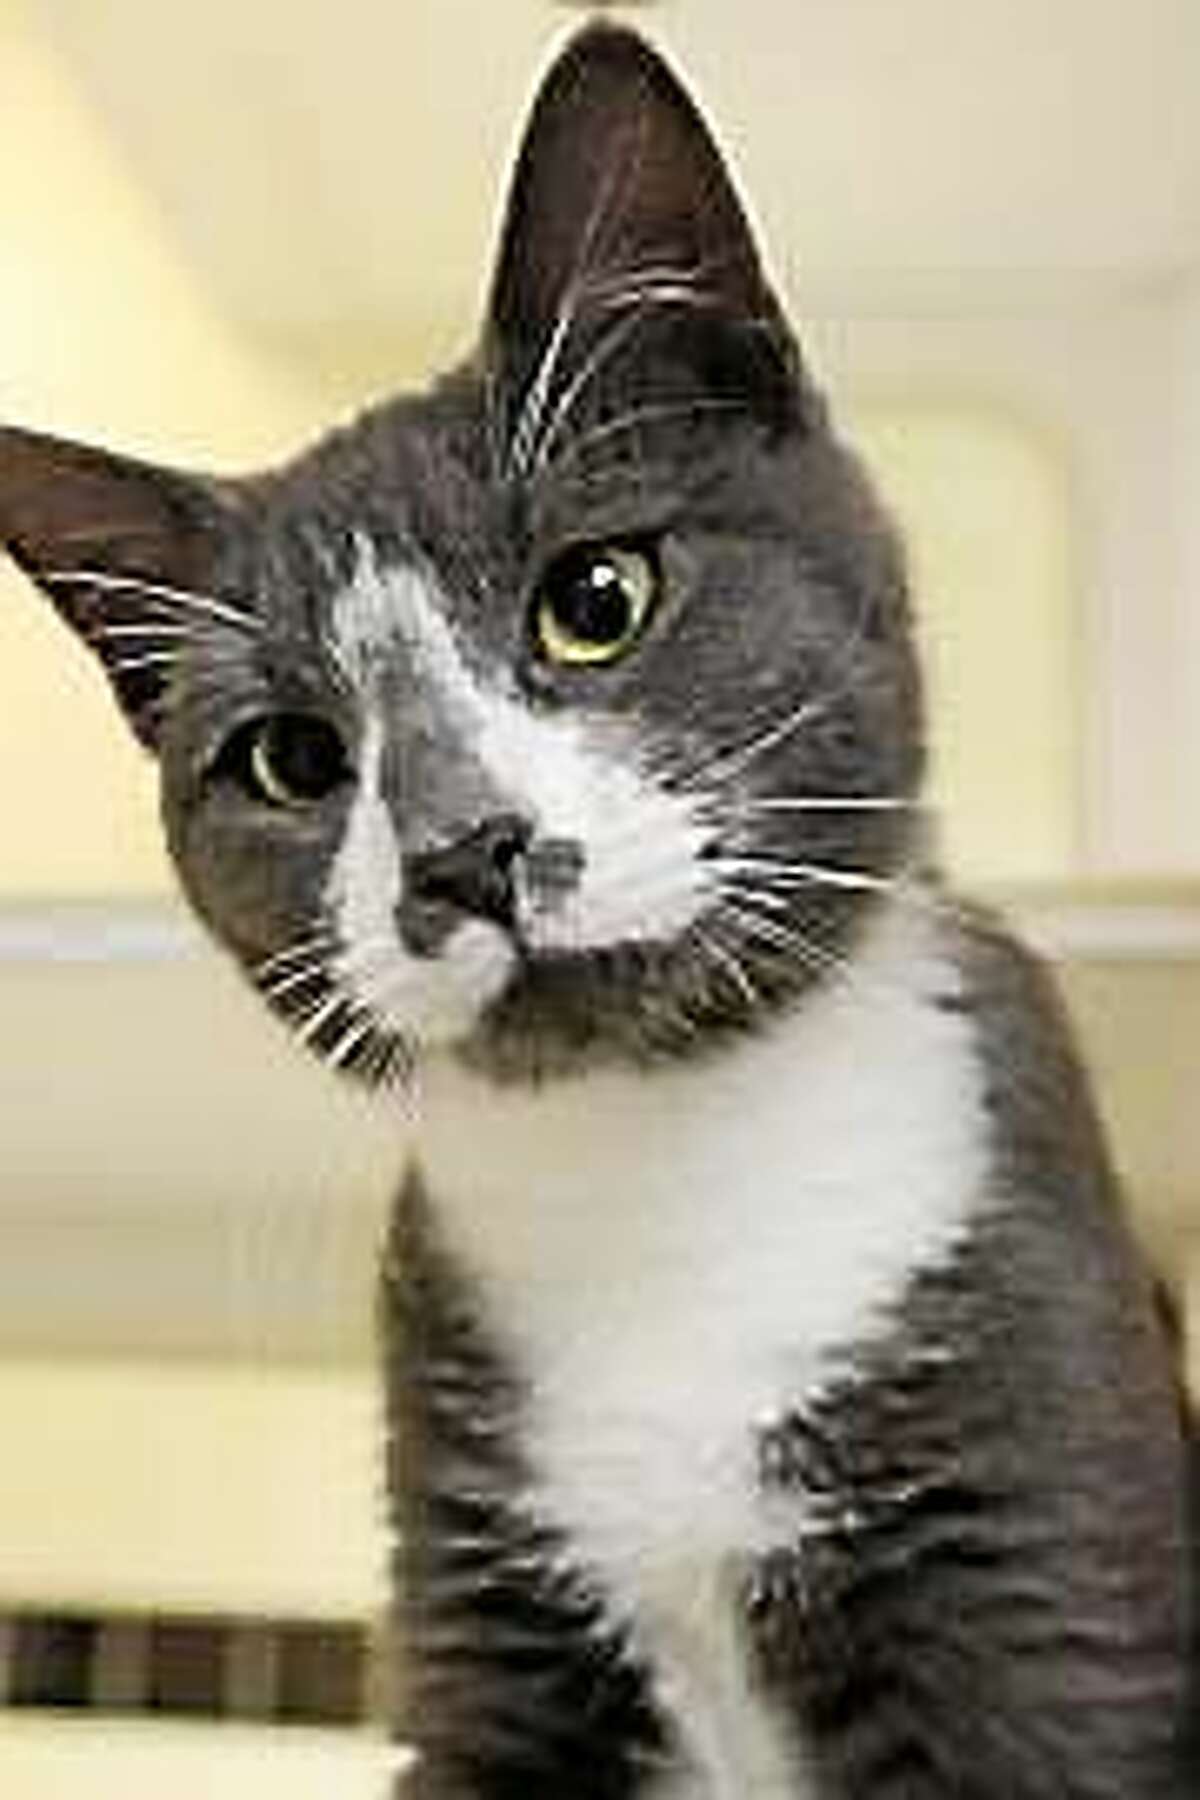 LEO Look at the jack-o-lantern nose this guy has! With beautiful markings, and soft grey and white fur, Leo is going to be a wonderful, devoted friend. Leo is 1 year old, altered, and fully vetted including shots. Come to visit and sign up to visit with Leo and see if this little guy steals your heart. Donít forget, we have winter ahead, and there is nothing like coming in to a friendís greeting! Leo is in Newington. Inquiries for adoption should be made at the Connecticut Humane Society located at 701 Russell Road in Newington or by calling 860-594-4500 or toll free at 800-452-0114. The Connecticut Humane Society is a private organization with branch shelters in Waterford, Westport and a cat adoption center in the PetSMART store in New London. The Connecticut Humane Society is not affiliated with any other animal welfare organizations on the national, regional or local level.